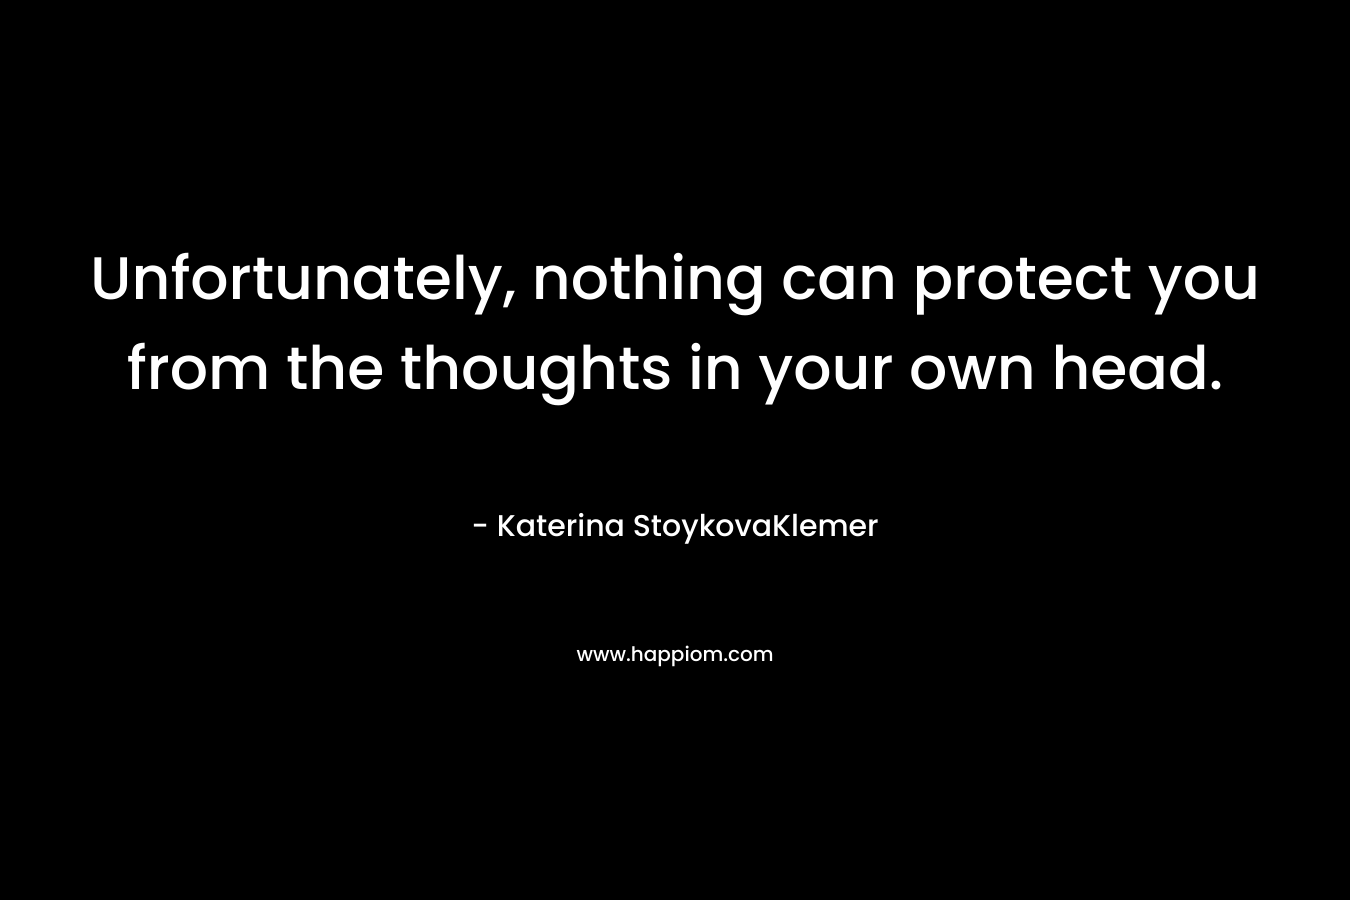 Unfortunately, nothing can protect you from the thoughts in your own head.